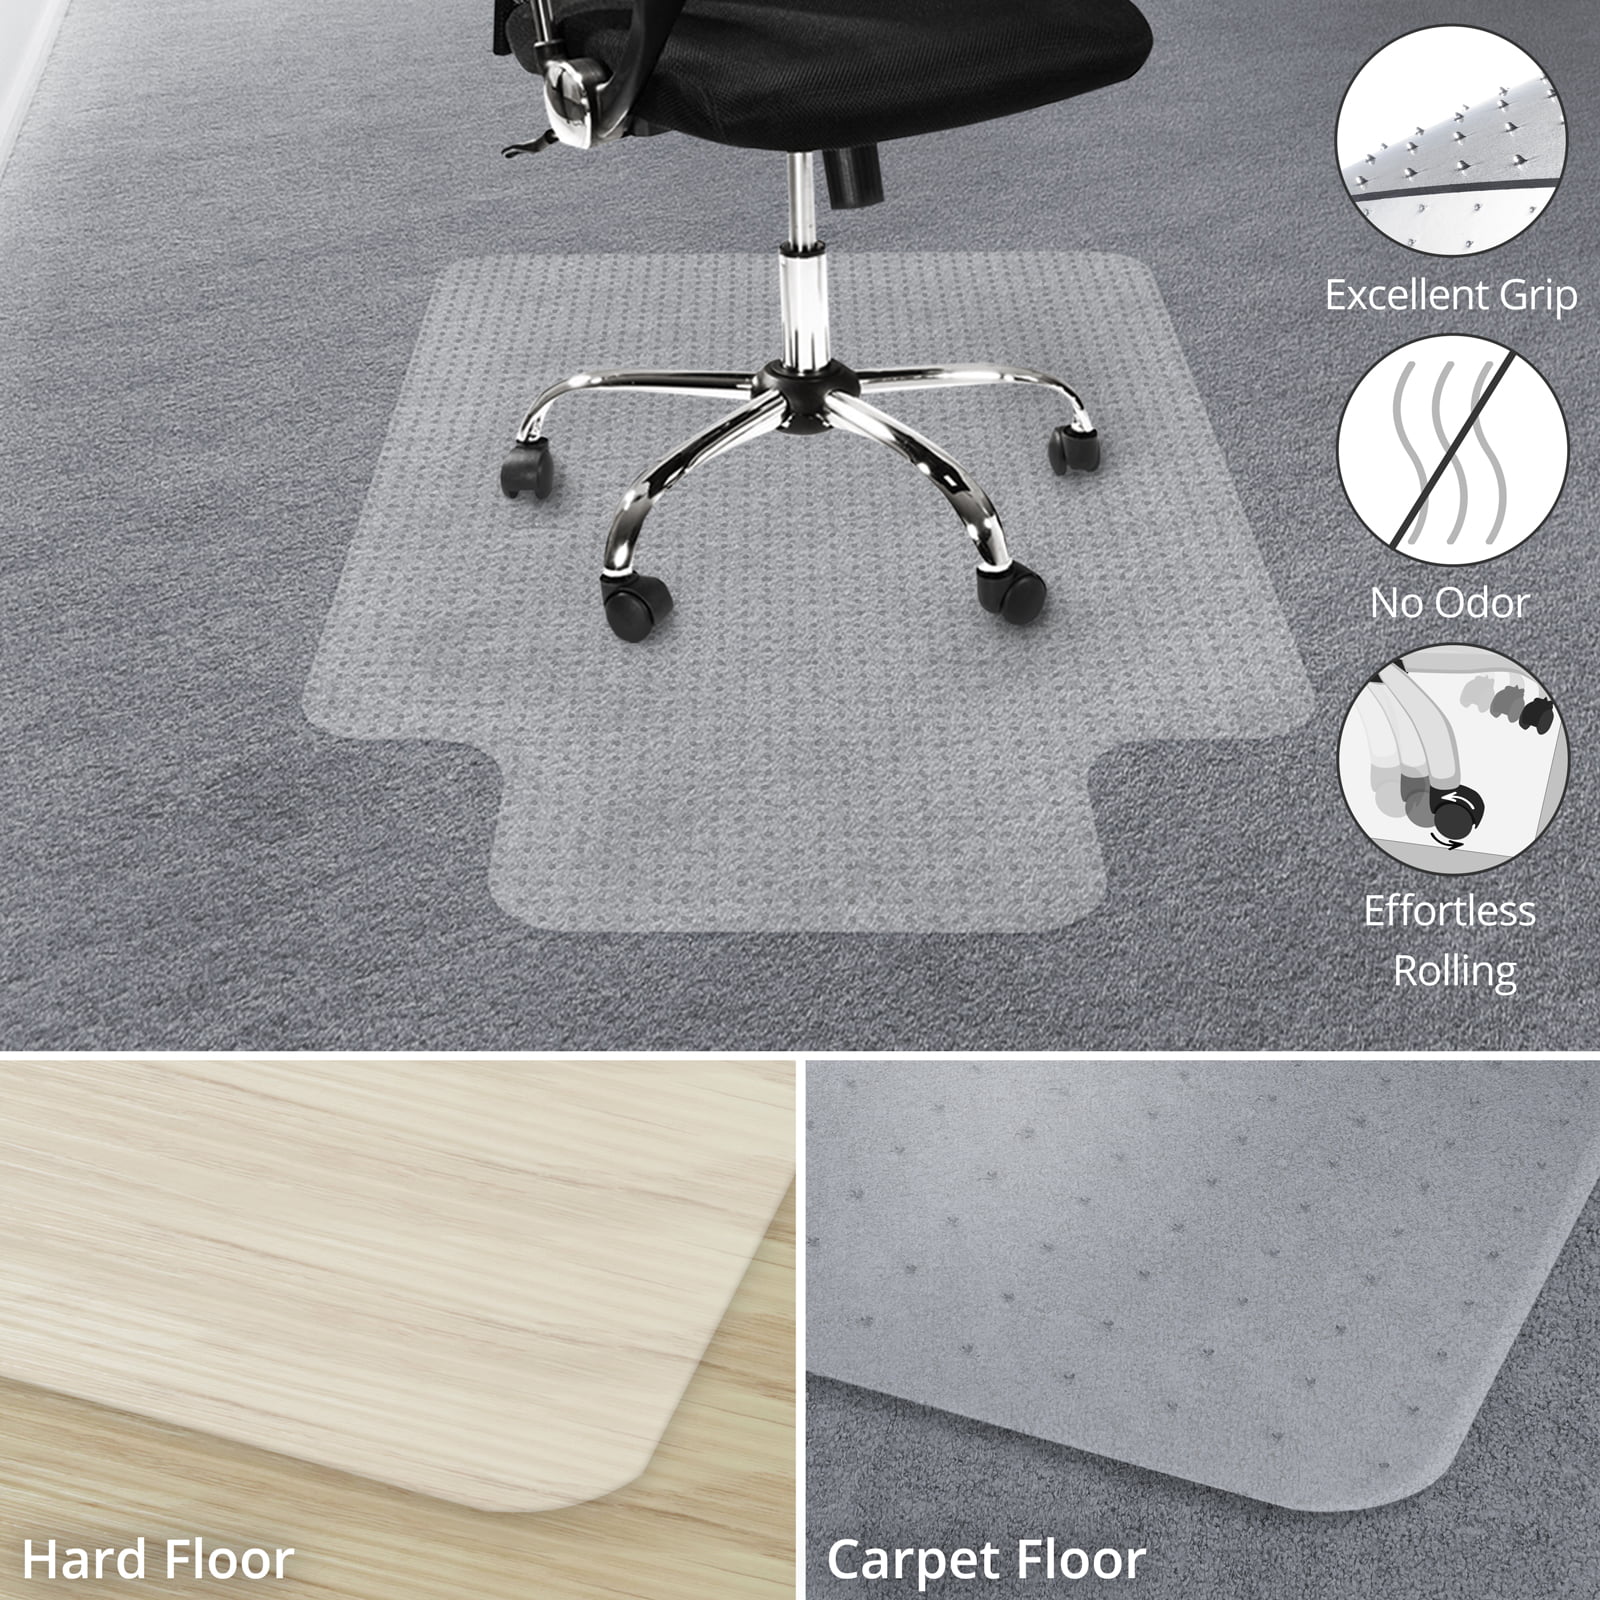 Multiple Sizes Eco-Friendly Series Chair Floor Protector PET 100% Recycled Translucent Floor Mat for Office or Home Use Office Marshal Chair Mat for Carpet